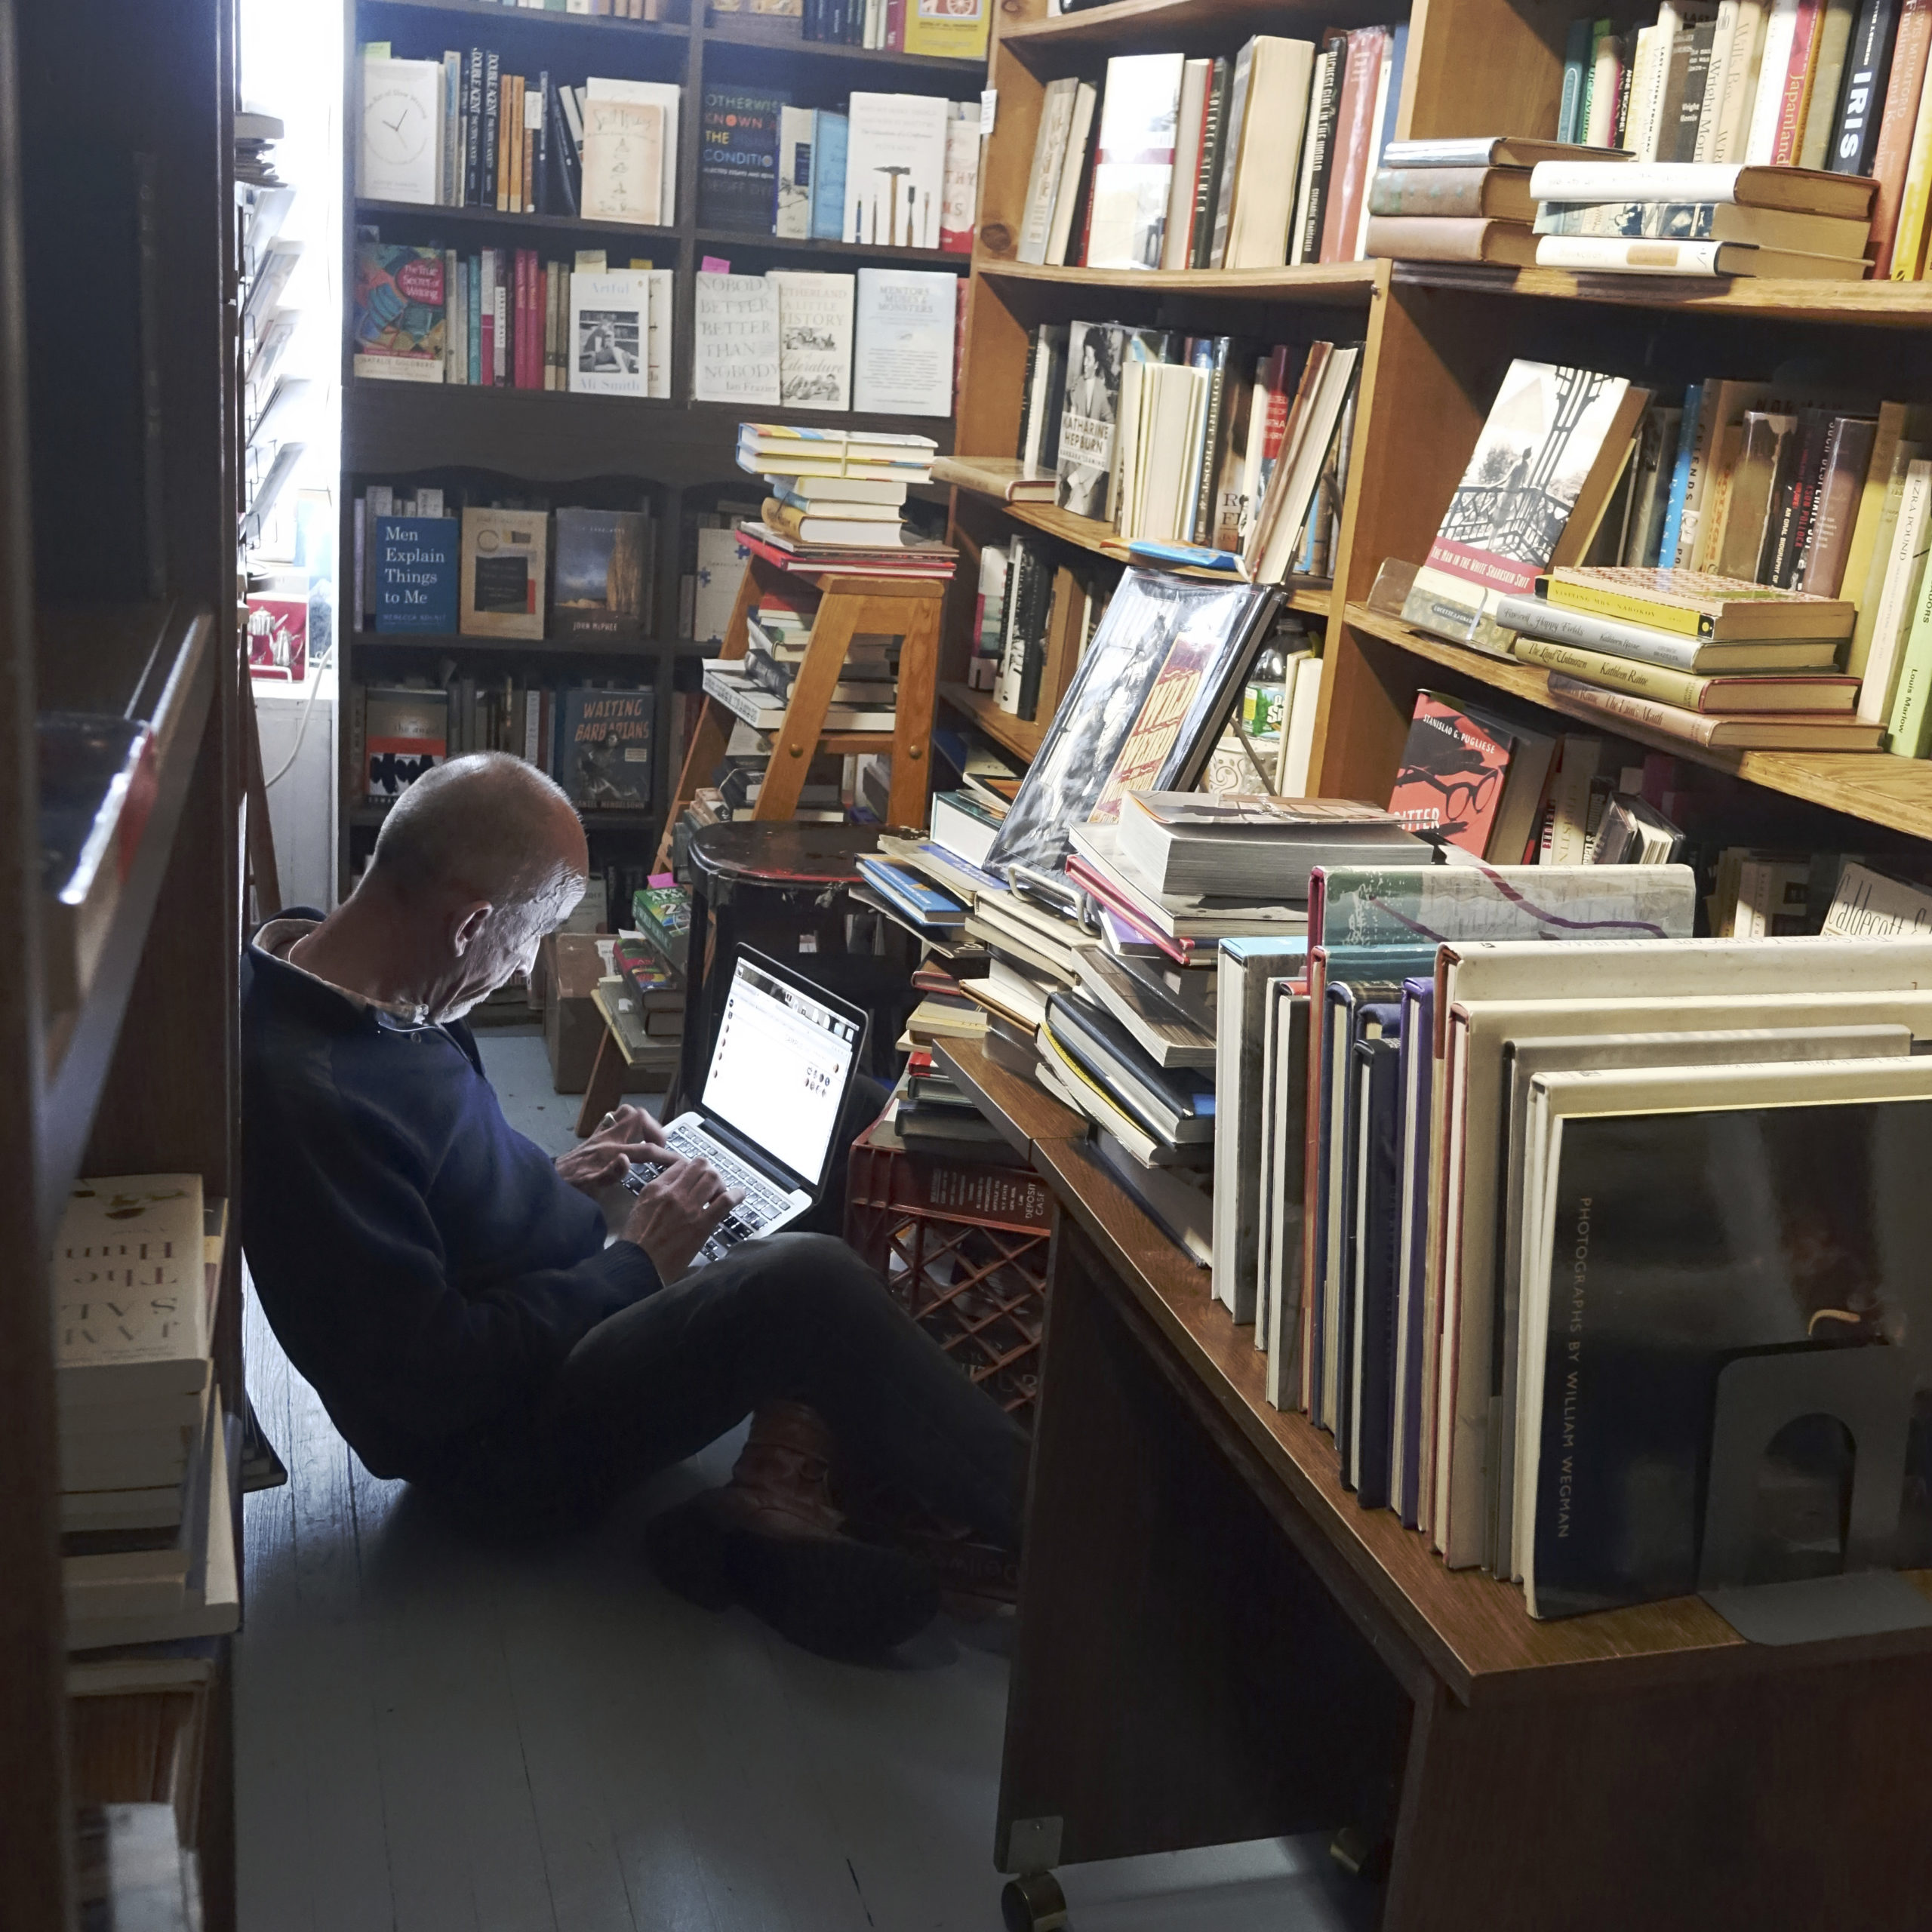 Mark Doty finds a quiet place to work in the stacks at Canio's.      KATHRYN SZOKA